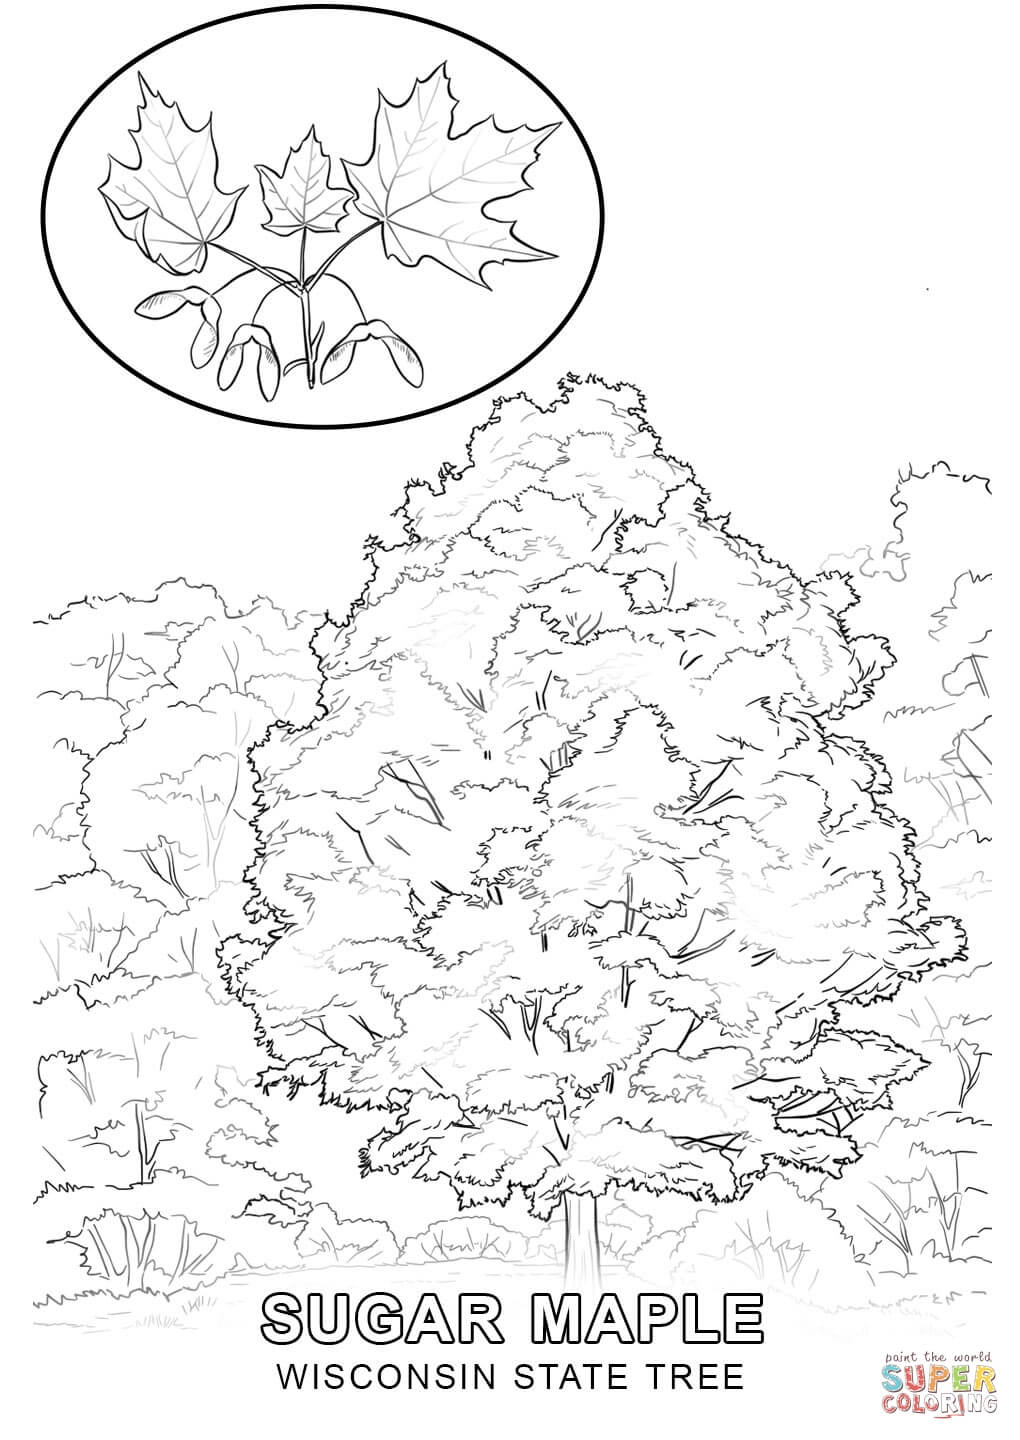 Wisconsin State Tree coloring page | Free Printable Coloring Pages